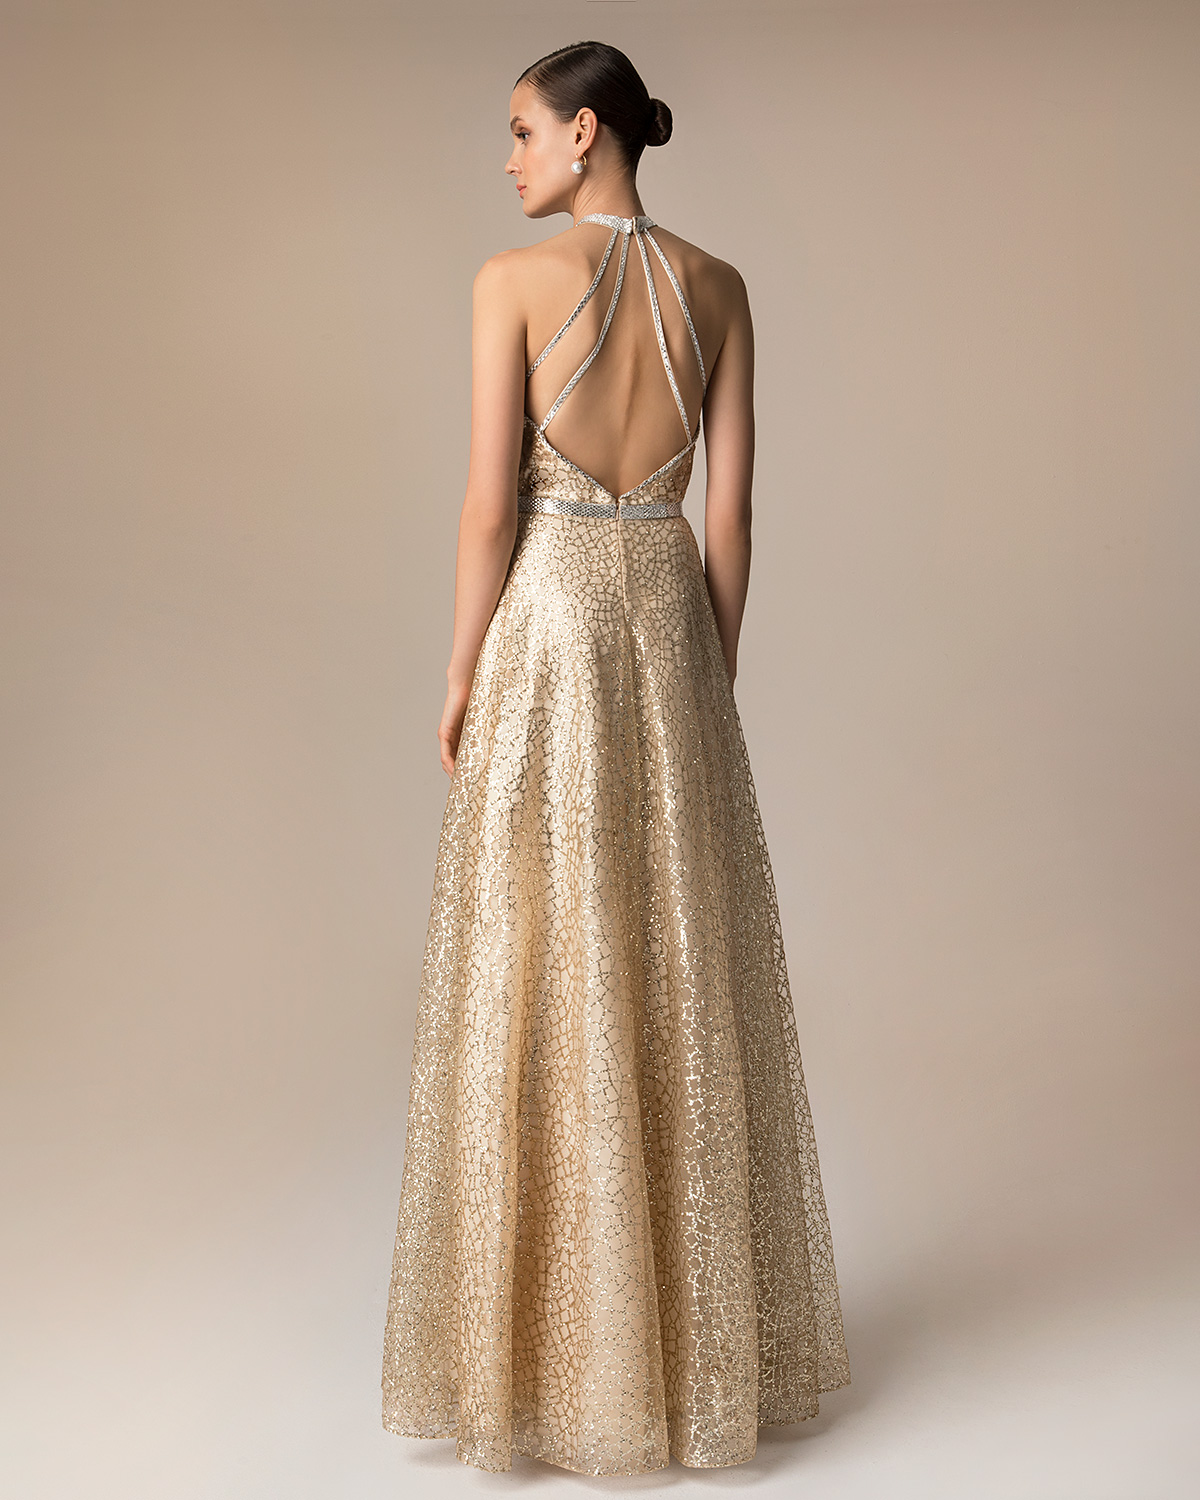 Evening Dresses / Long evening fully beaded dress with shining fabric and open back